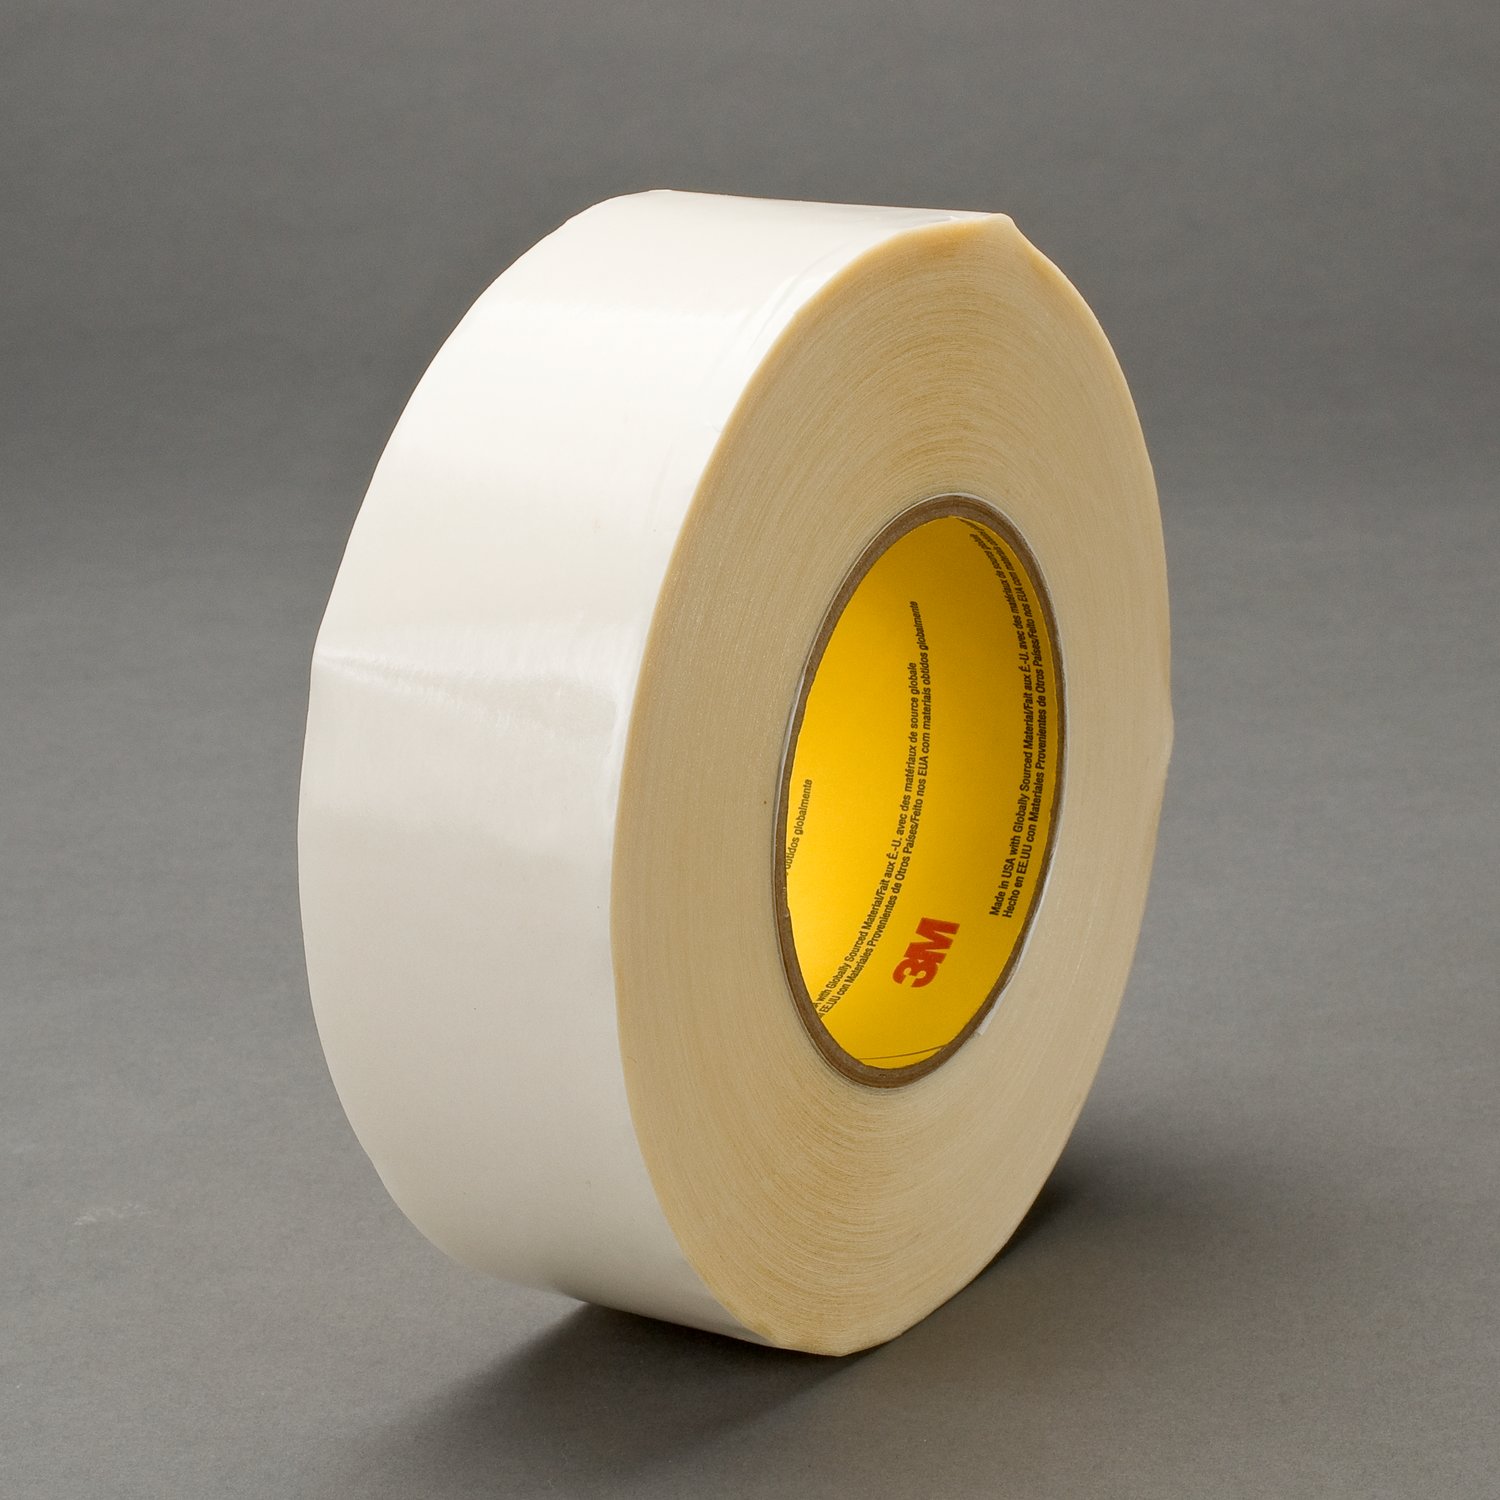 7010312236 - 3M Double Coated Tape 9741, Clear, 12 mm x 55 m, 6.5 mil, 96 rolls per
case